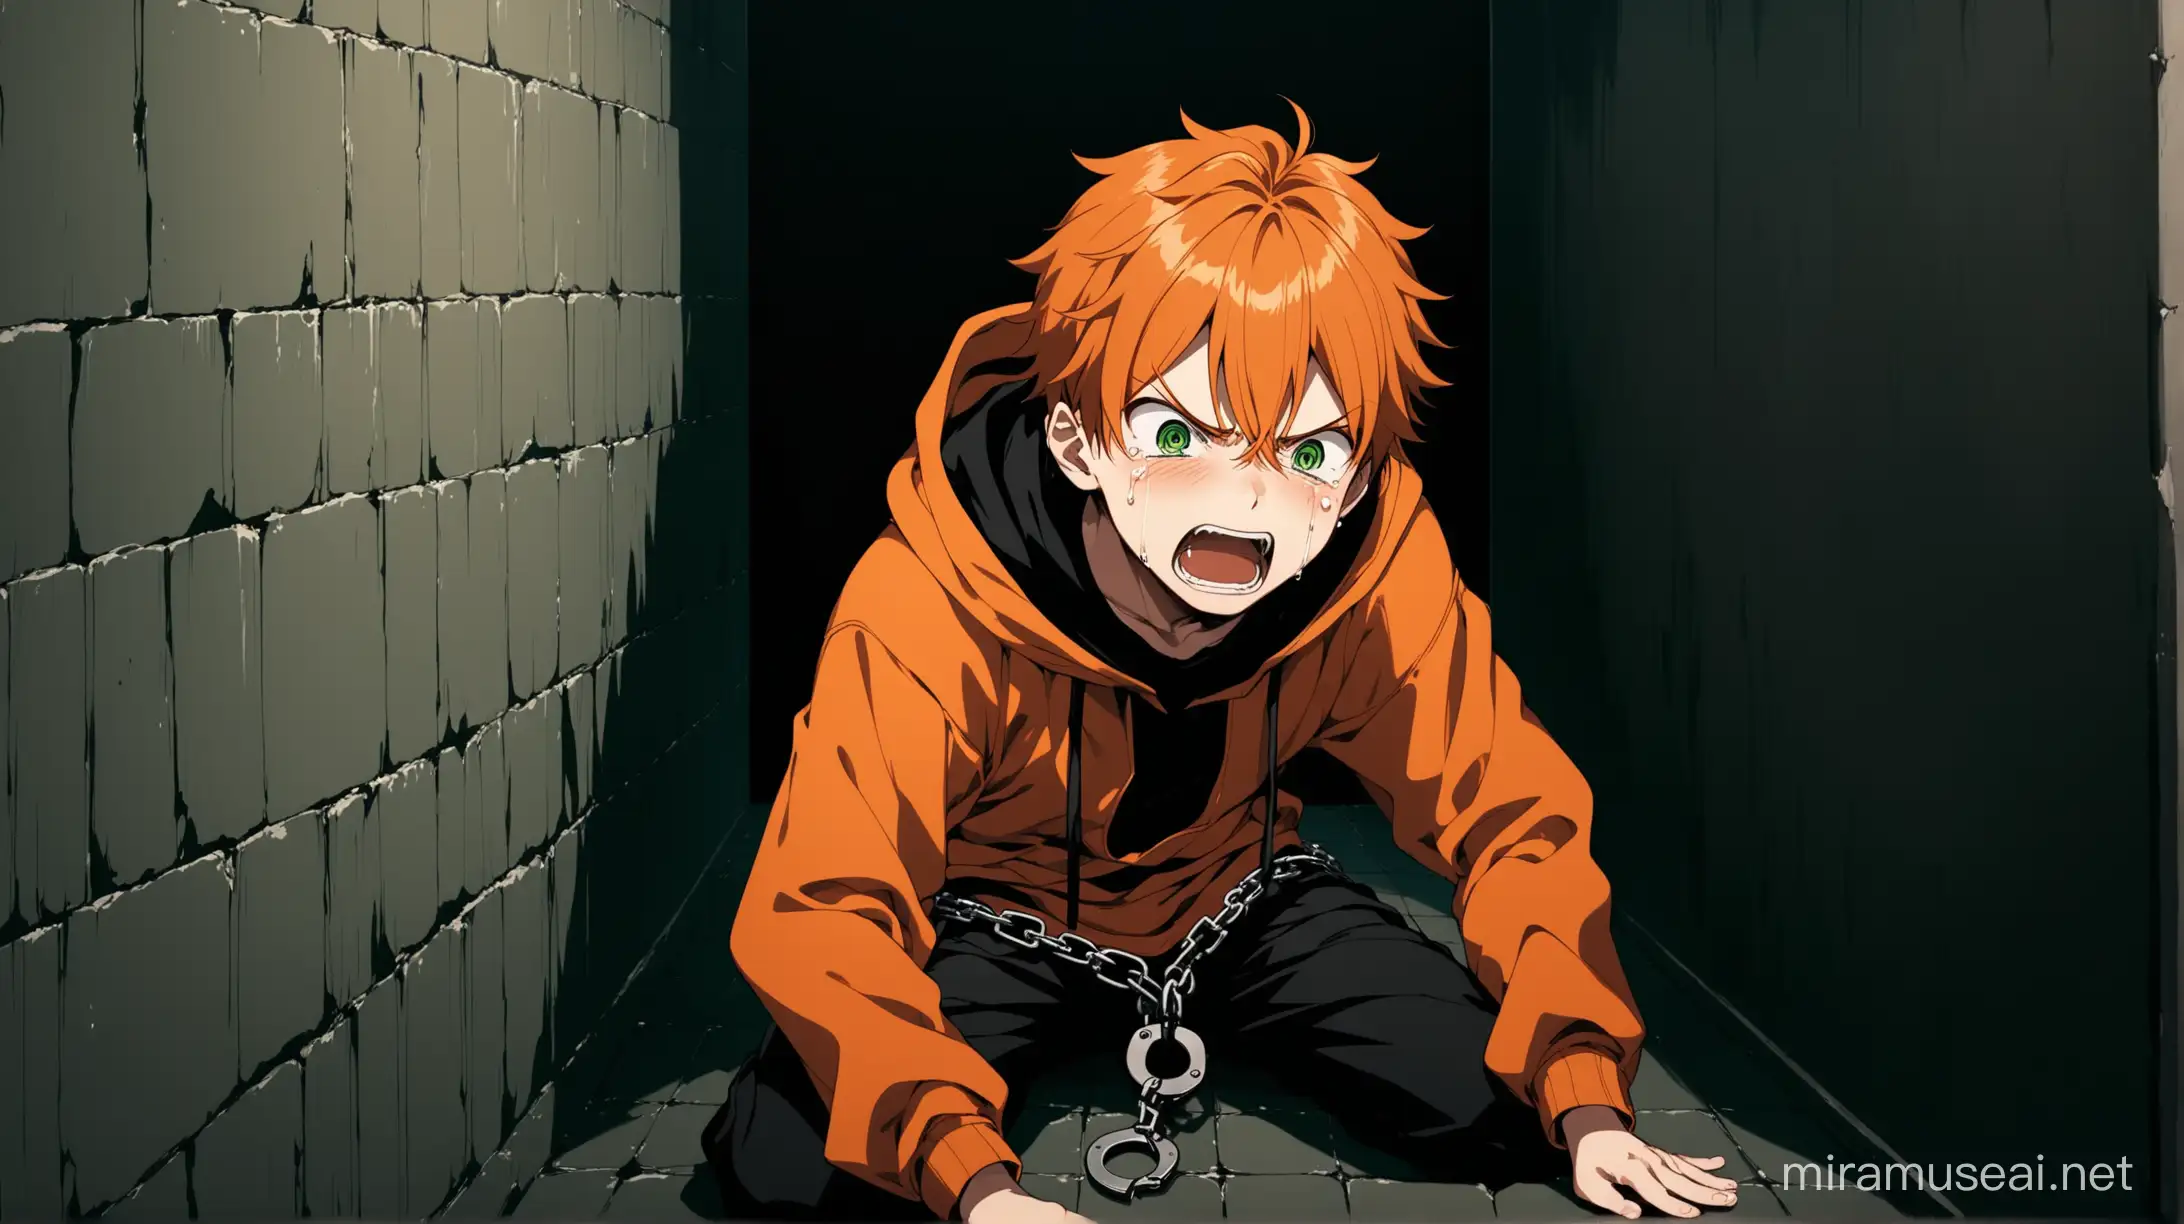 Anime Teenager Boy Crying and Screaming with Hands Tied in Secret Underground Room